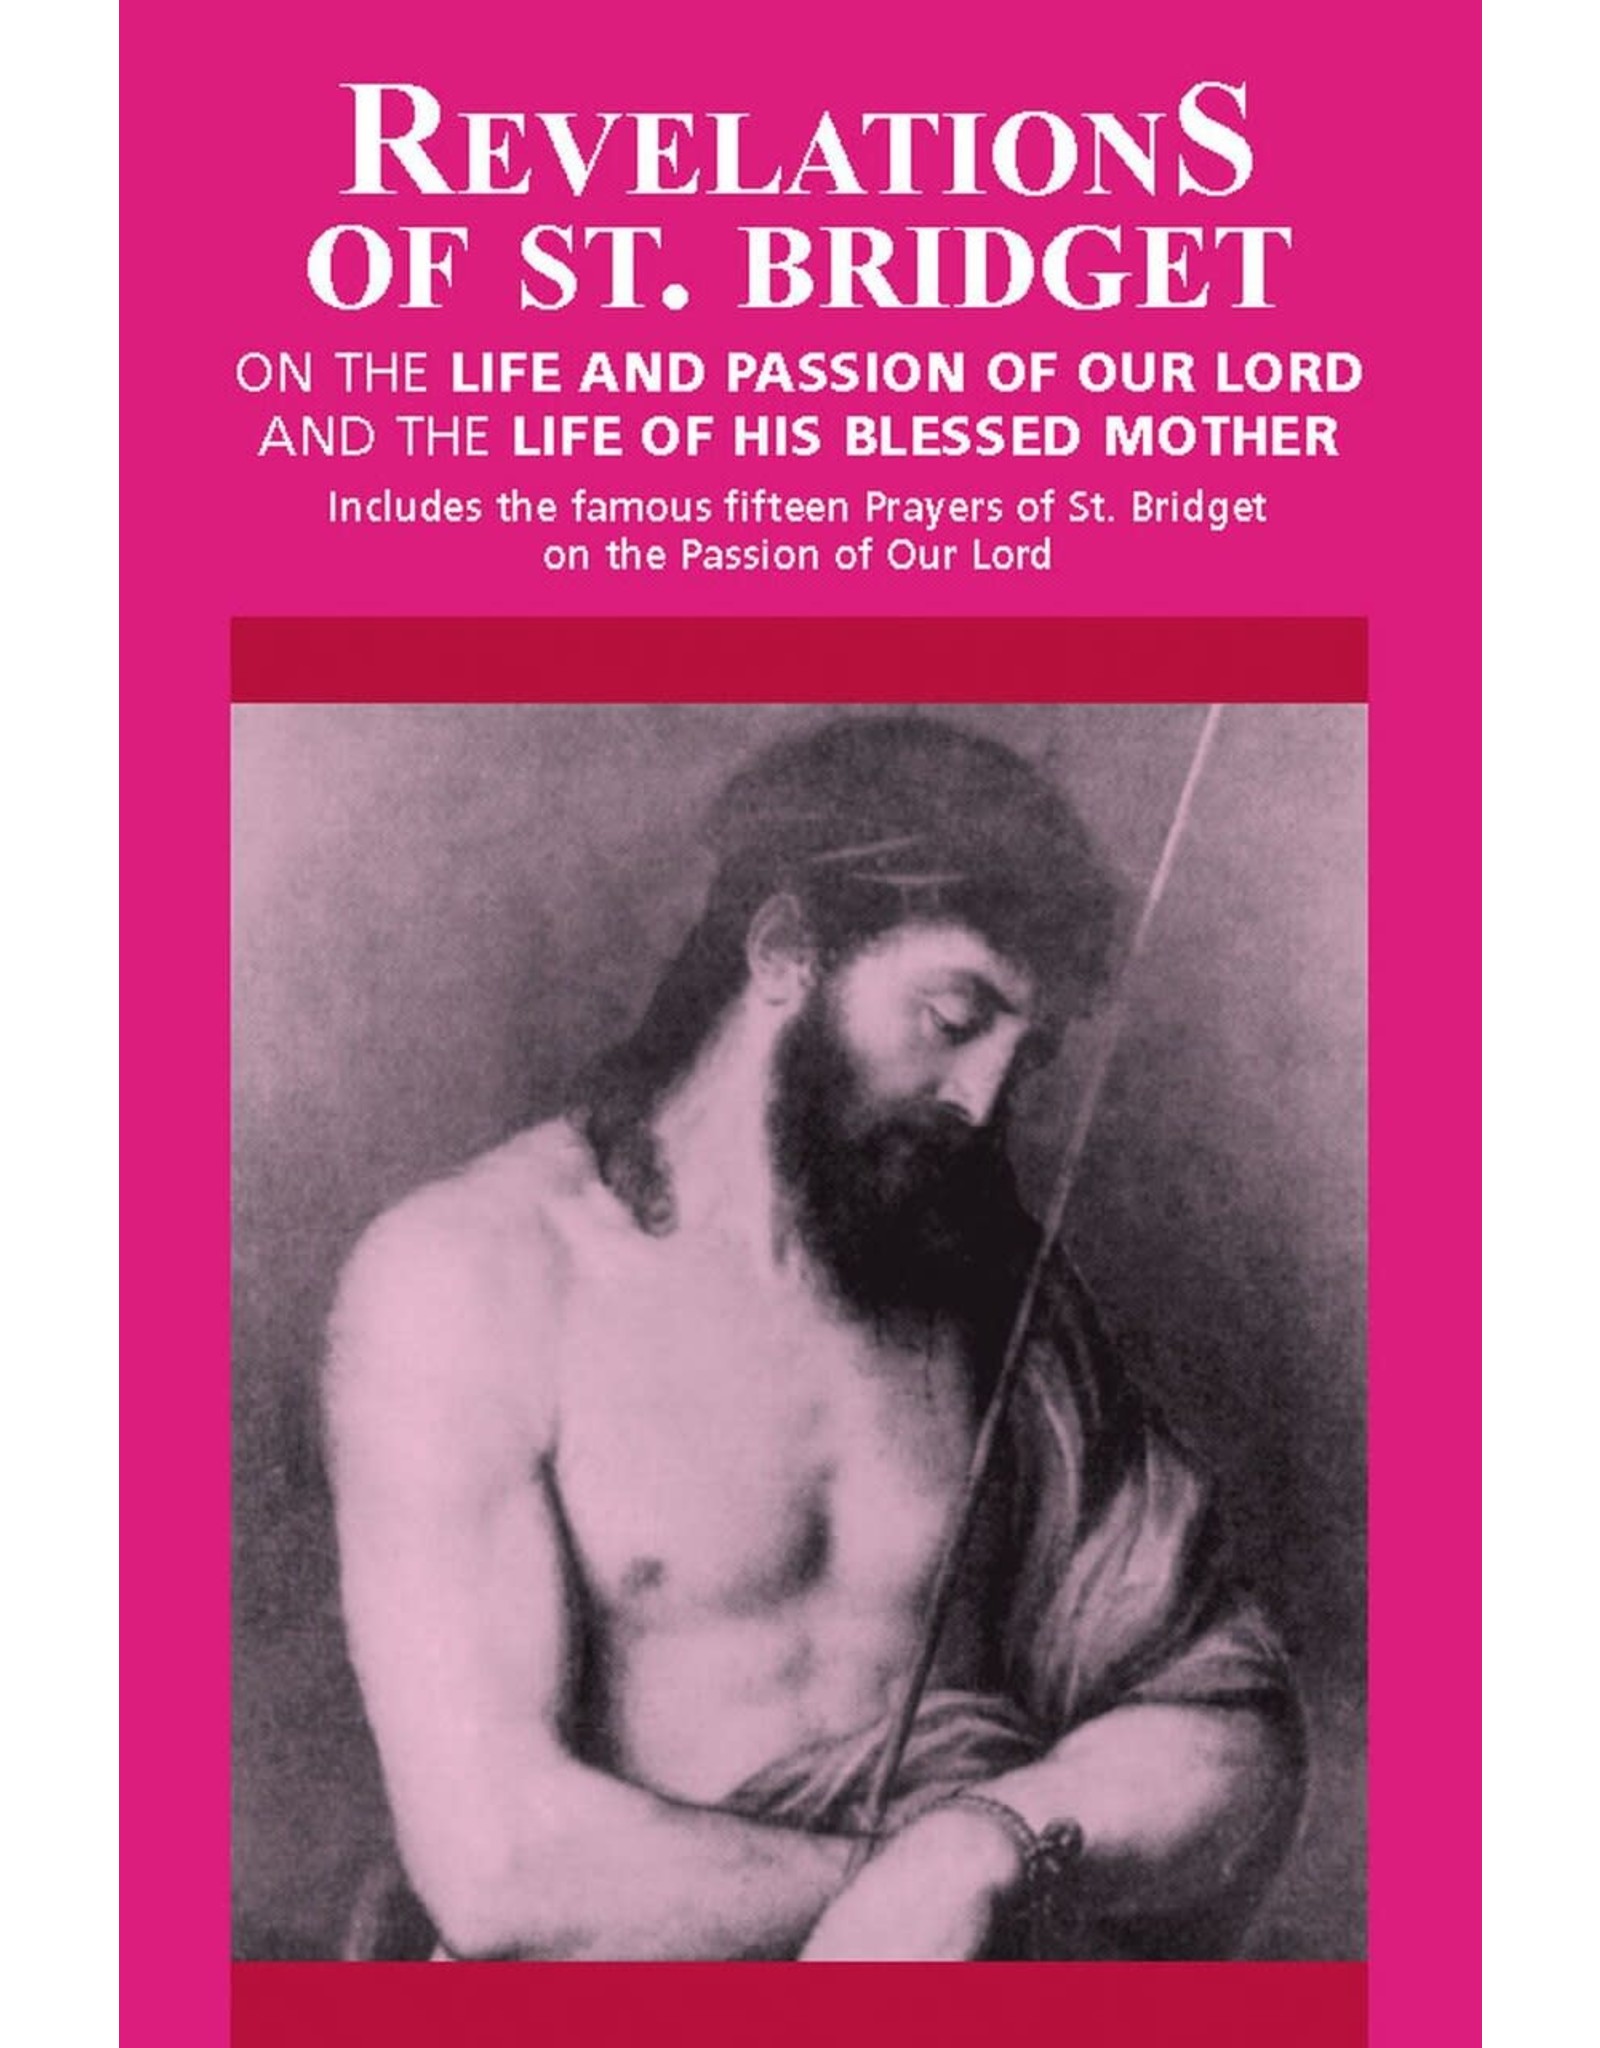 Tan Books Revelations Of Saint Bridget: On The Life And Passion Of Our Lord And The Life Of His Blessed Mother by St. Bridget Of Sweden (Paperback)